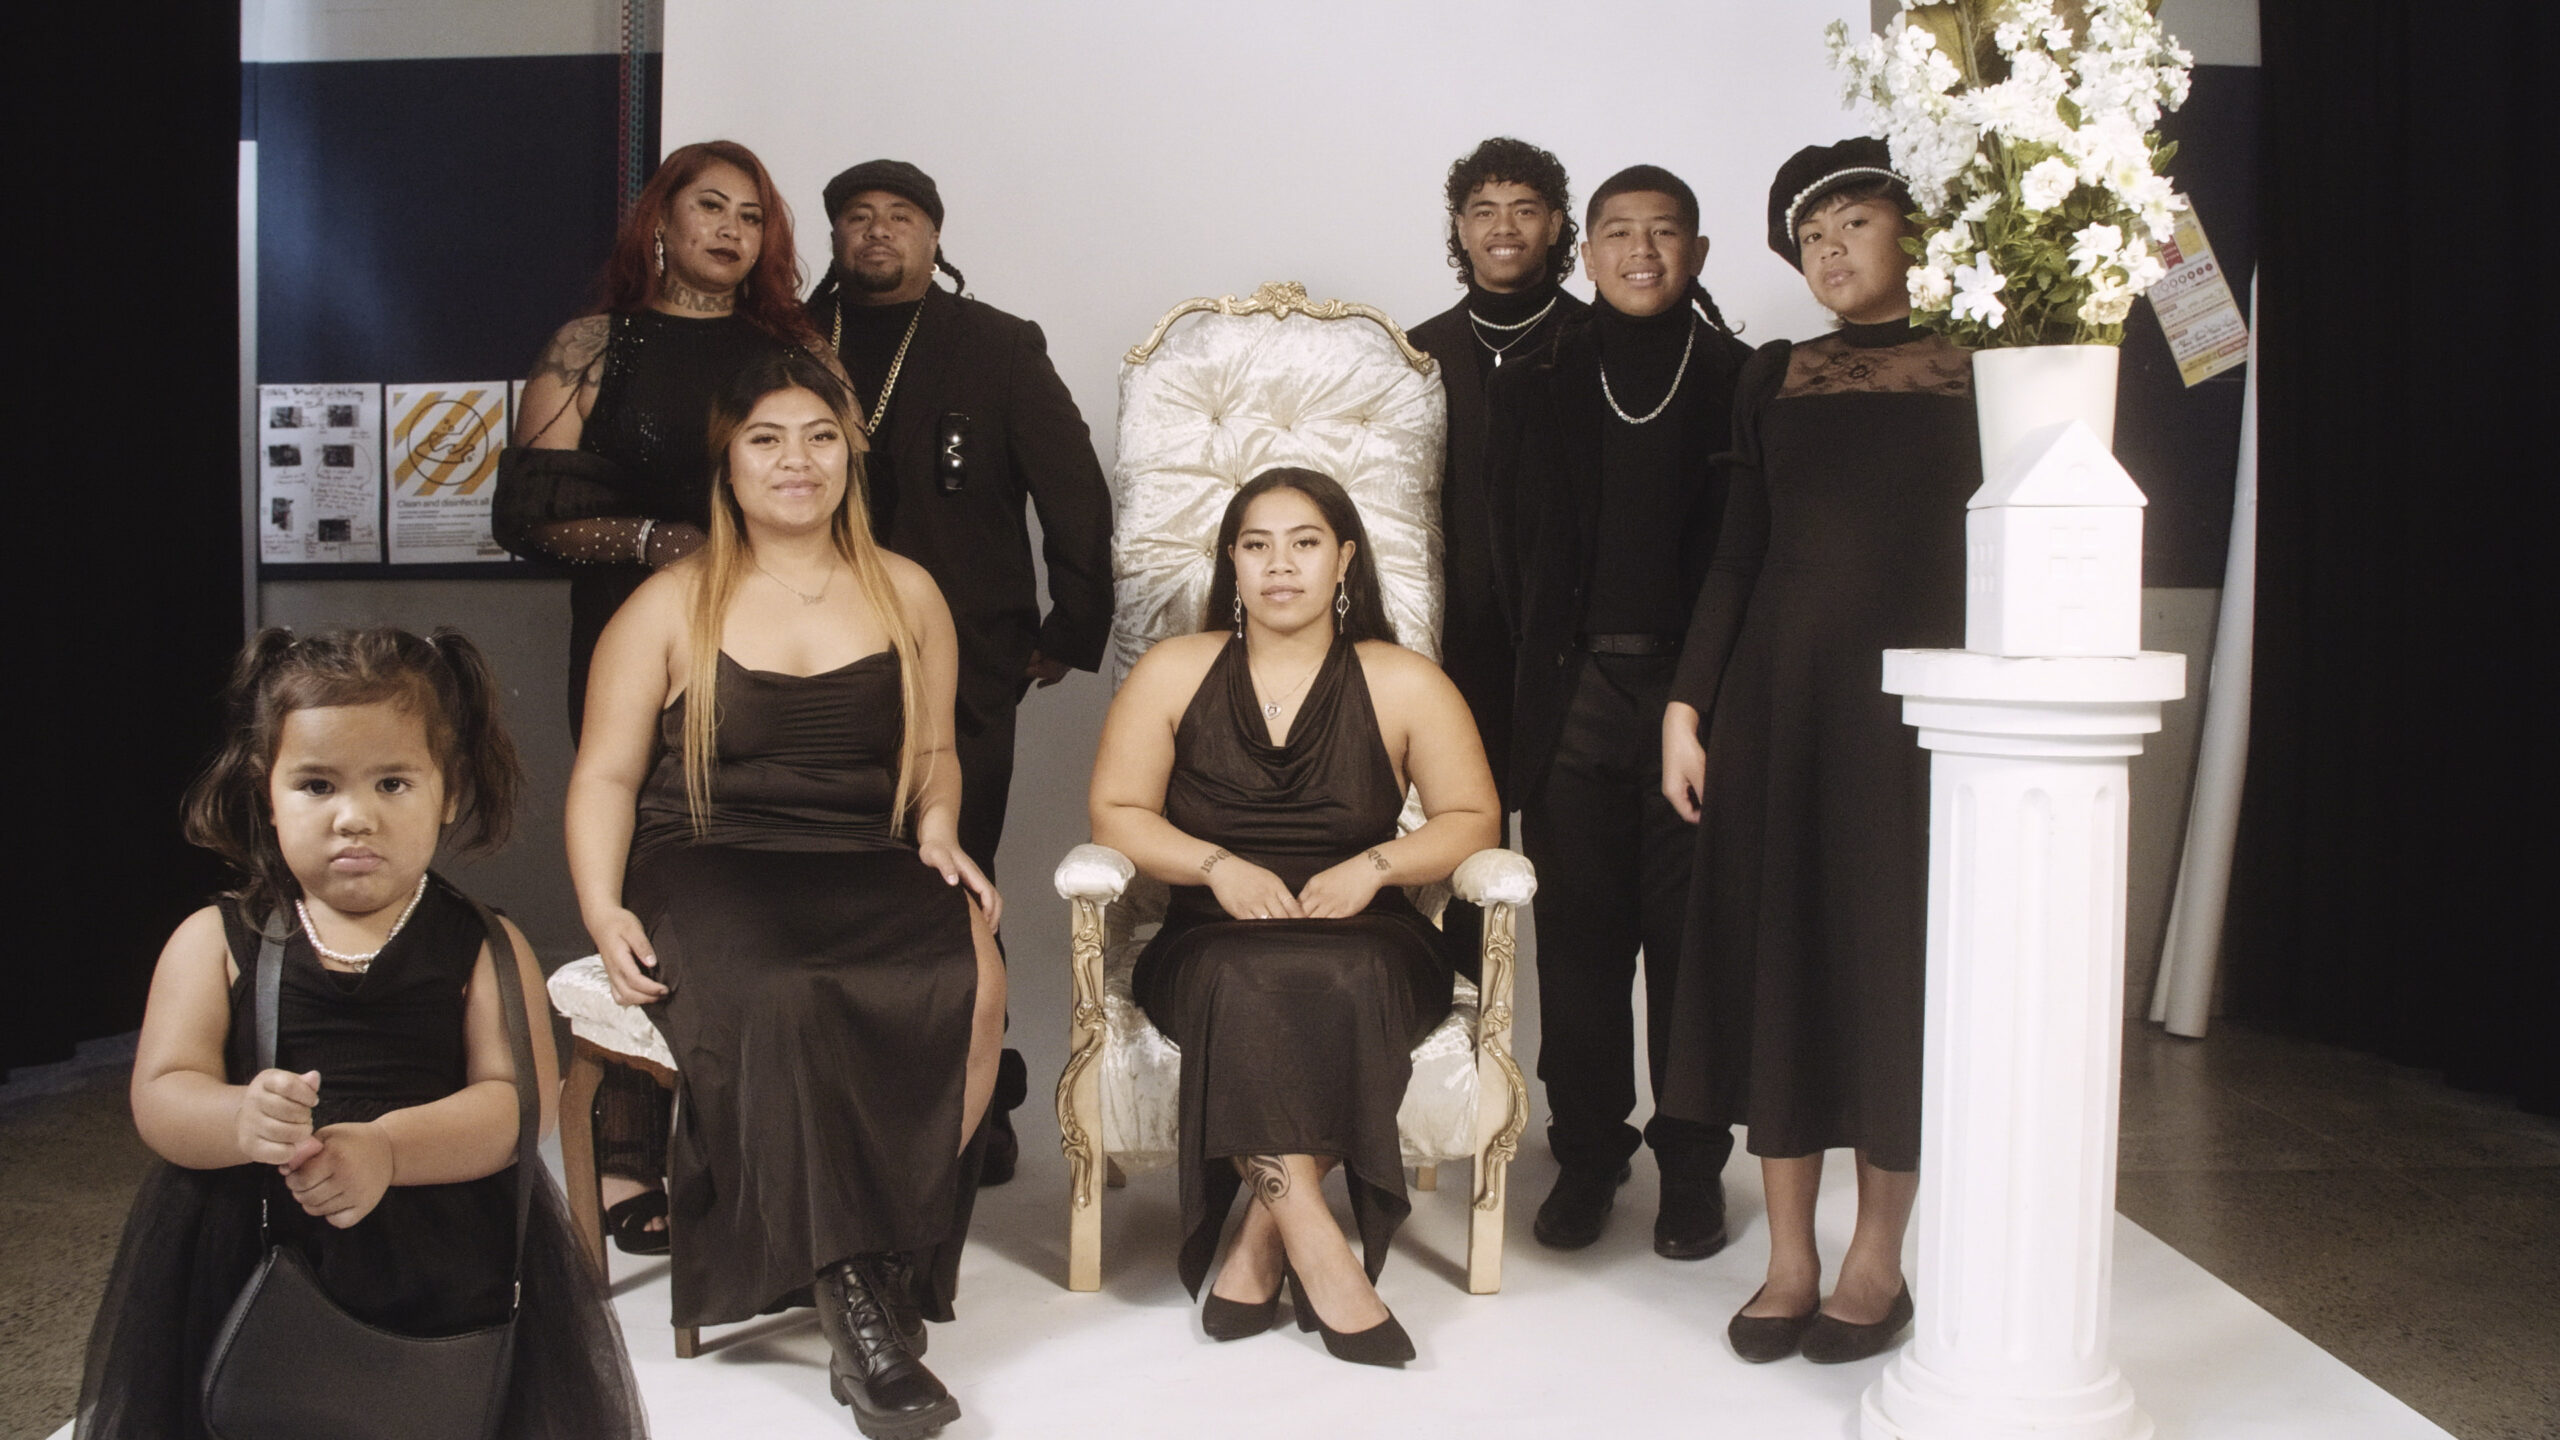 A group of people all in black dress and suits posing for a family photo in a photography studio.